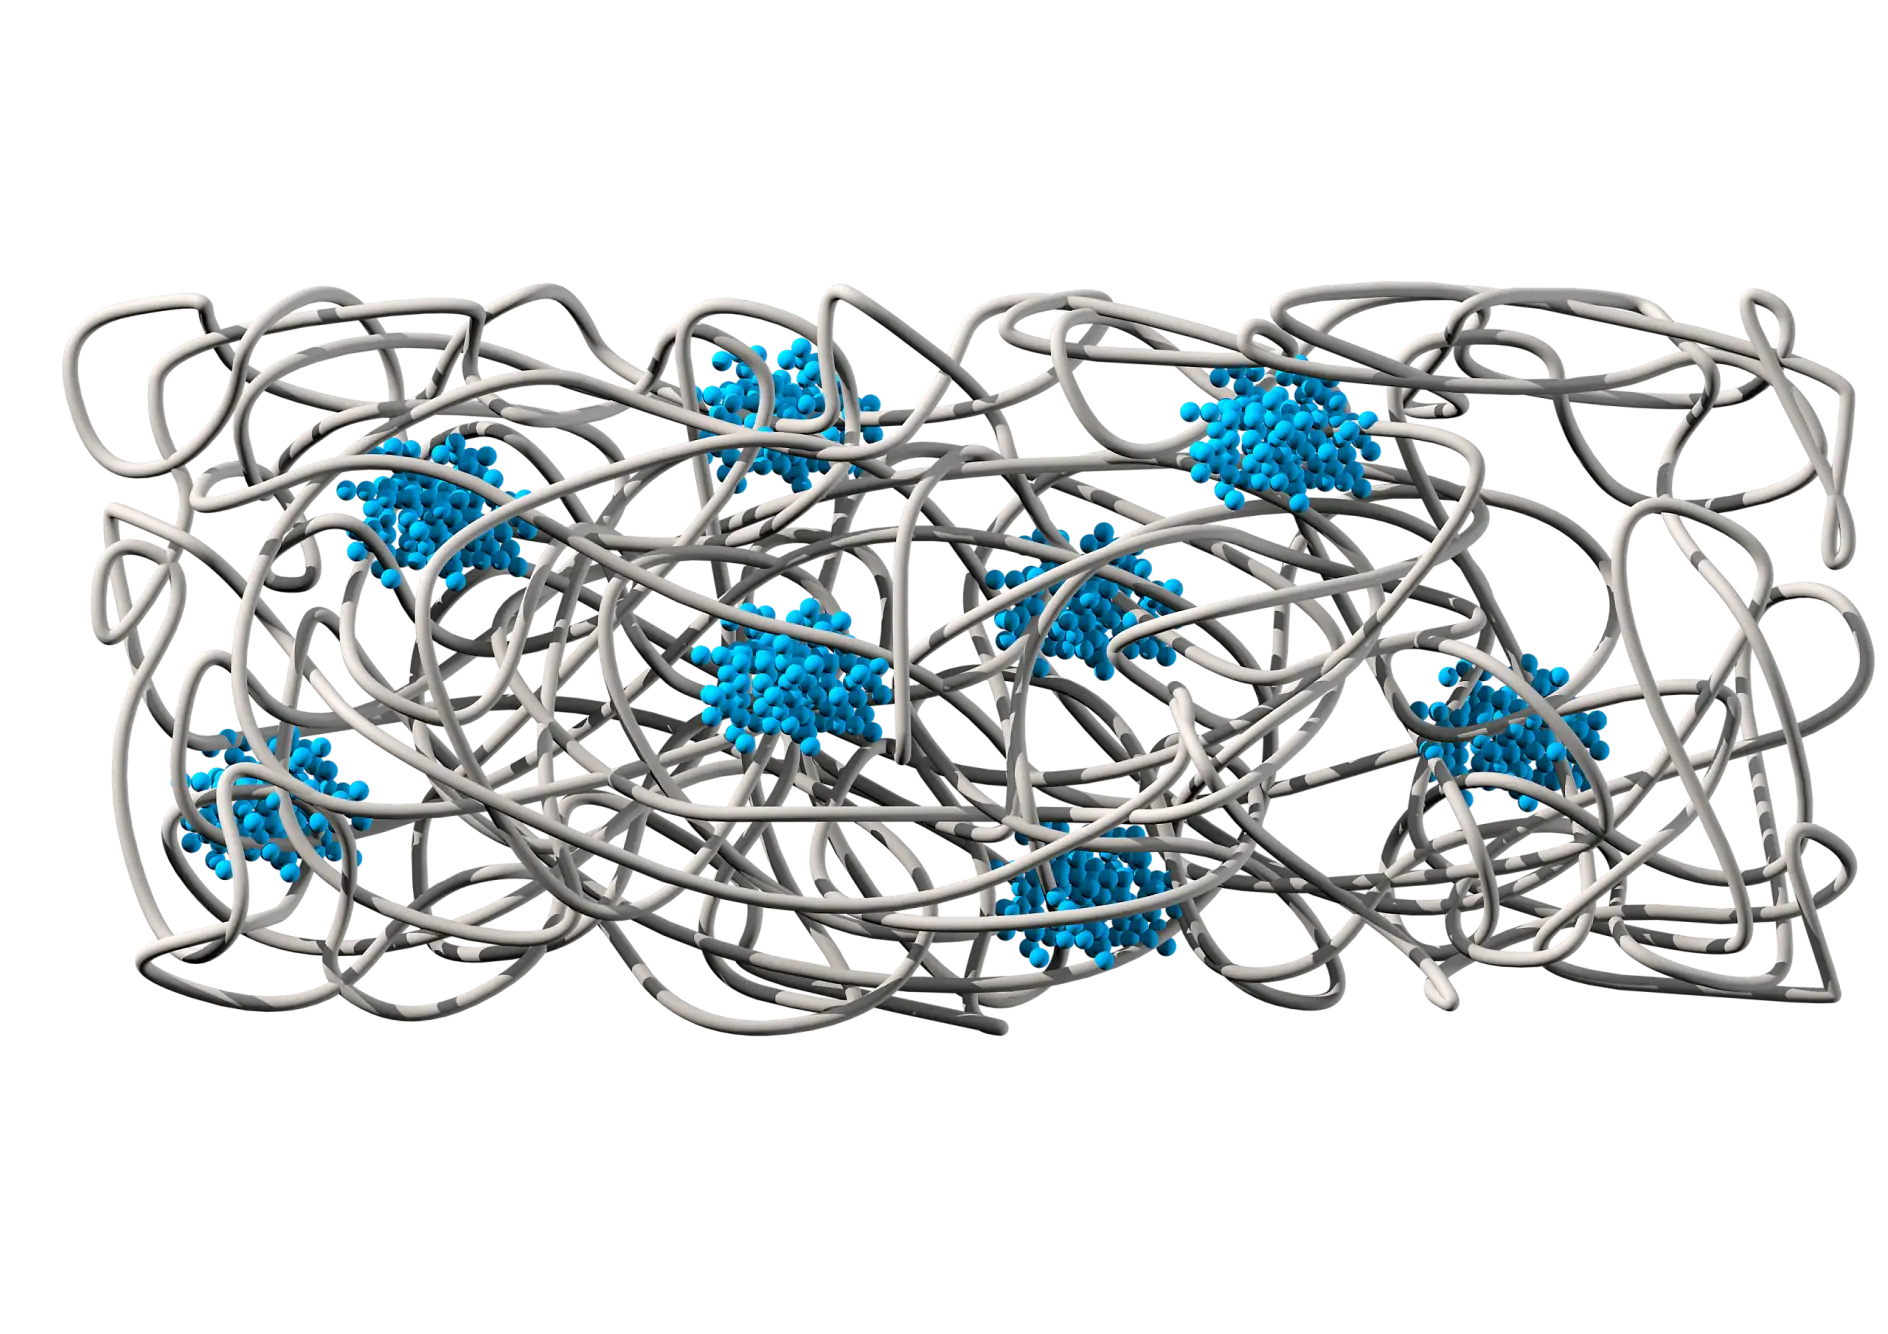 The chemical structur shows a Rubber Matrix (grey) that provides adhesion and elasticity. And Polysterene Domains (blue) that provide cohesion and tear resistance.